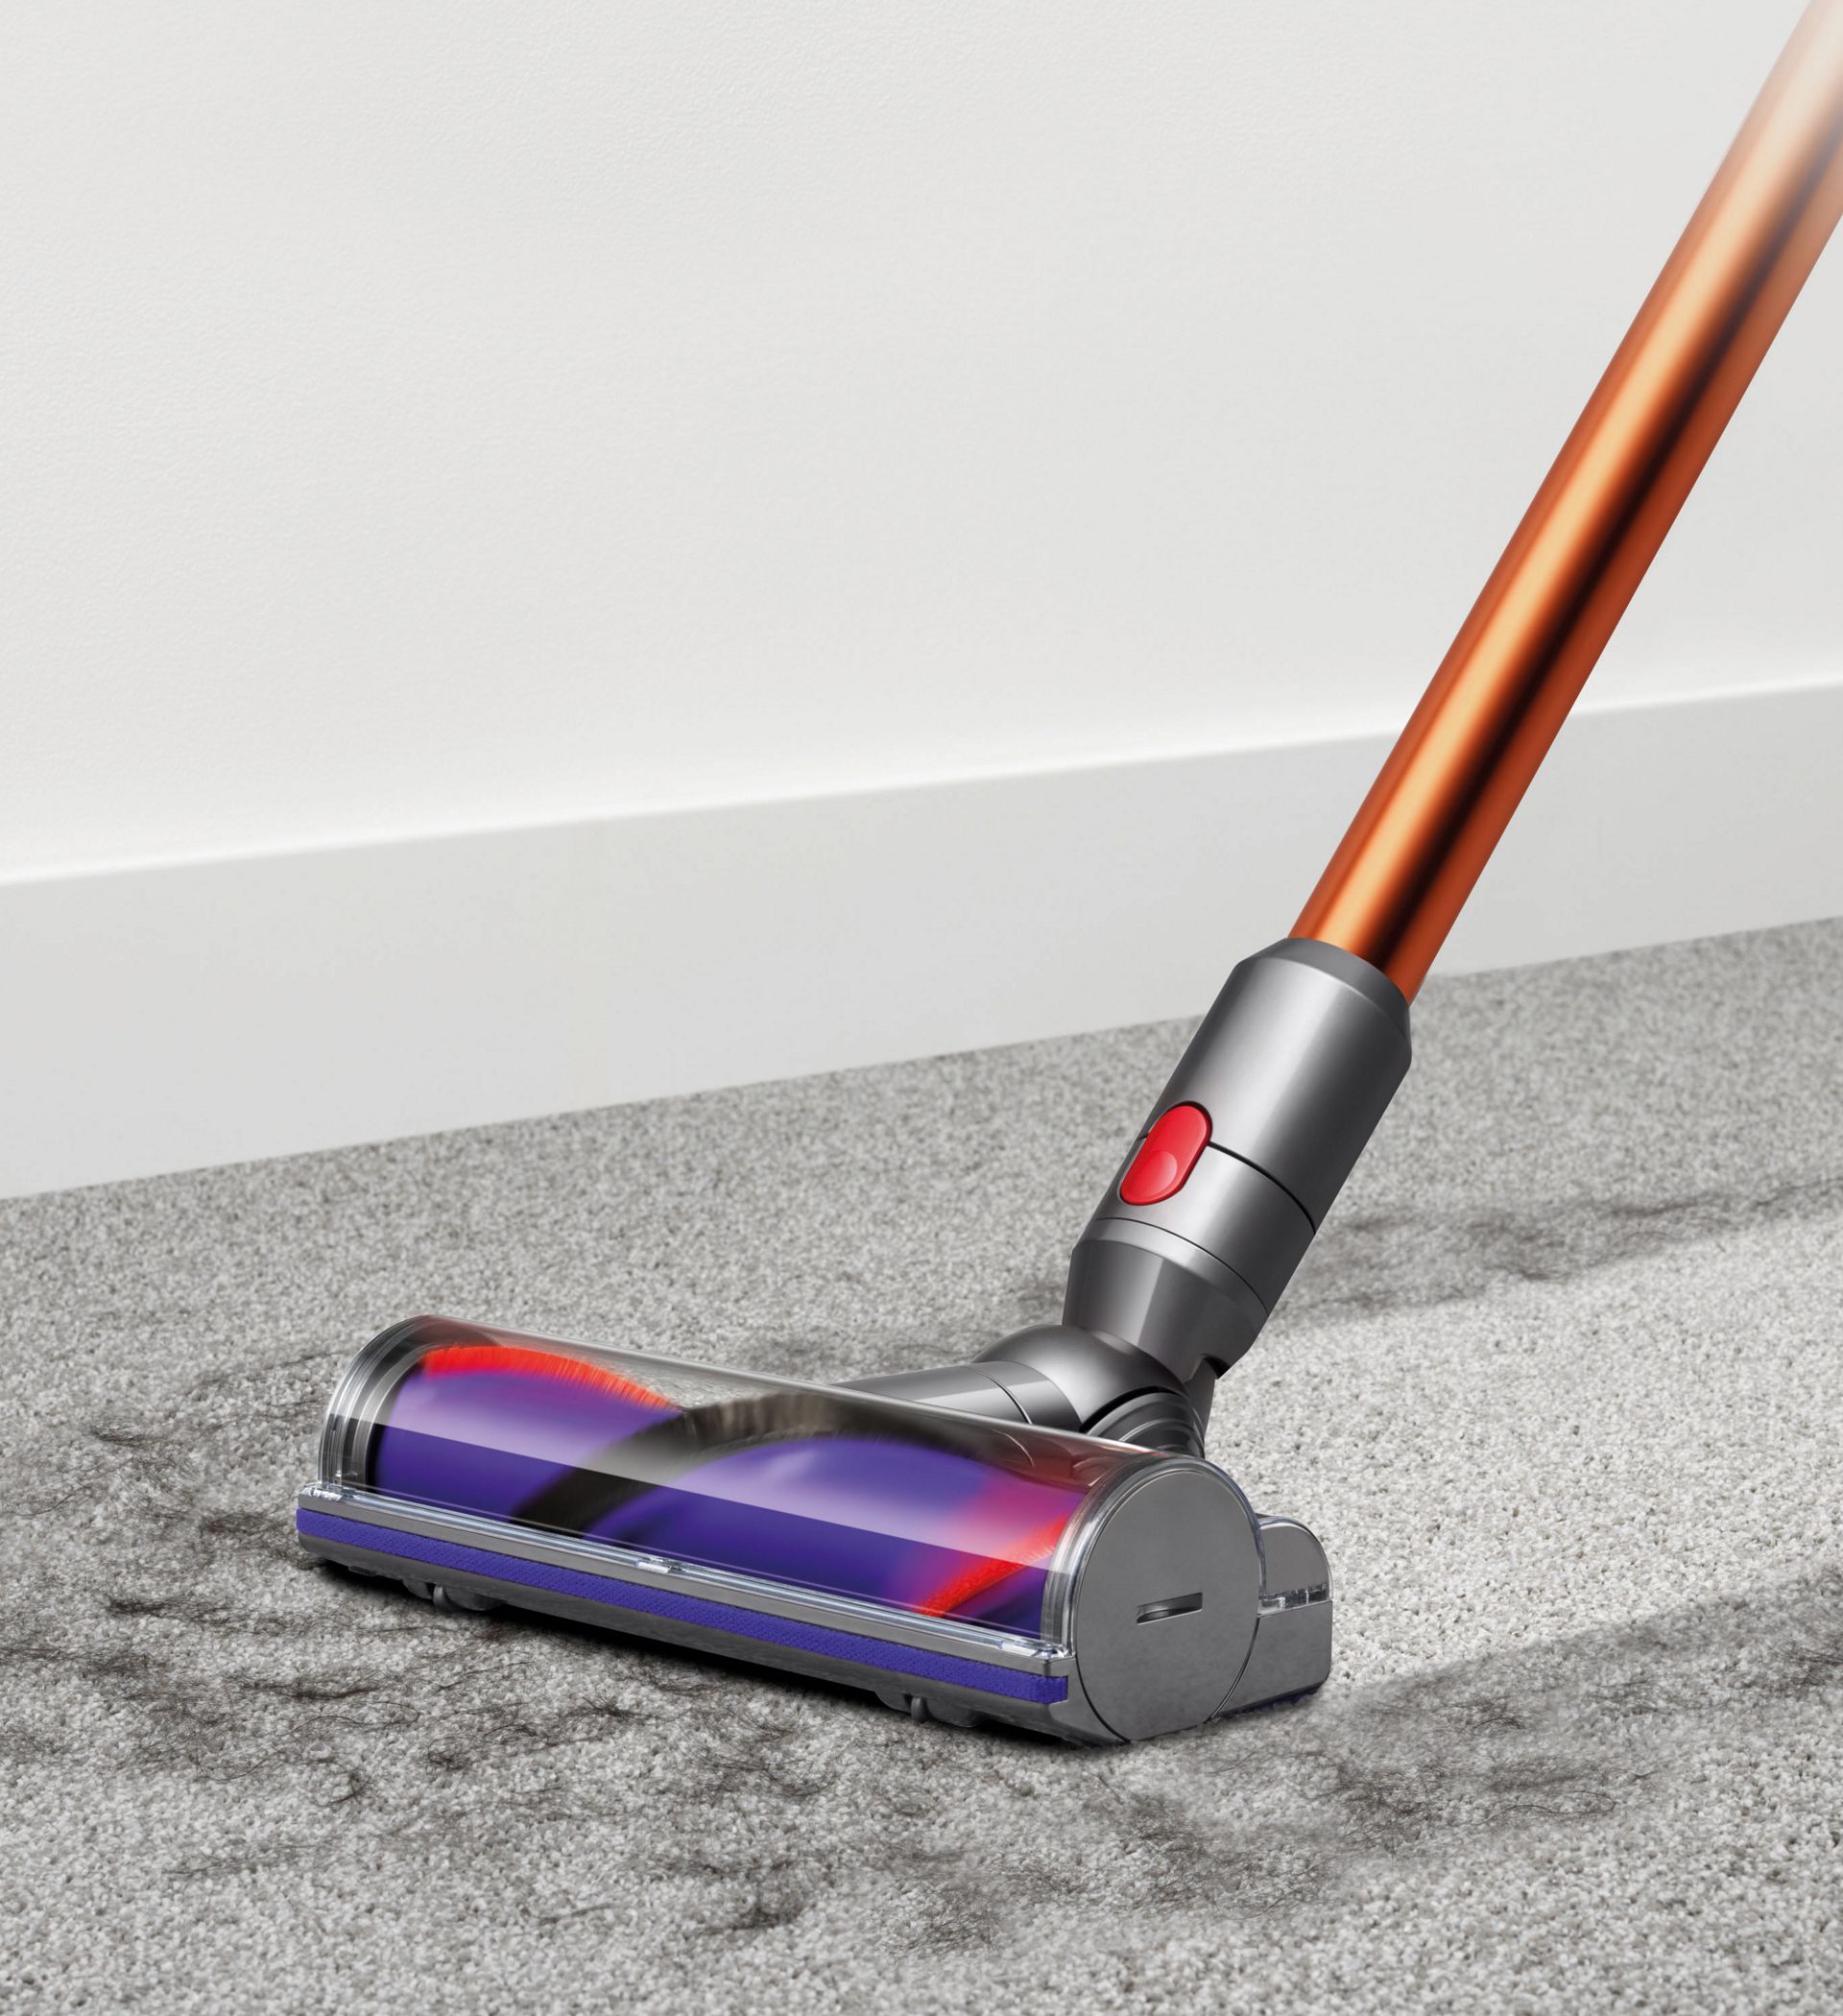 Dyson Cyclone V10 Direct drive cleaner head picking up debris from carpet